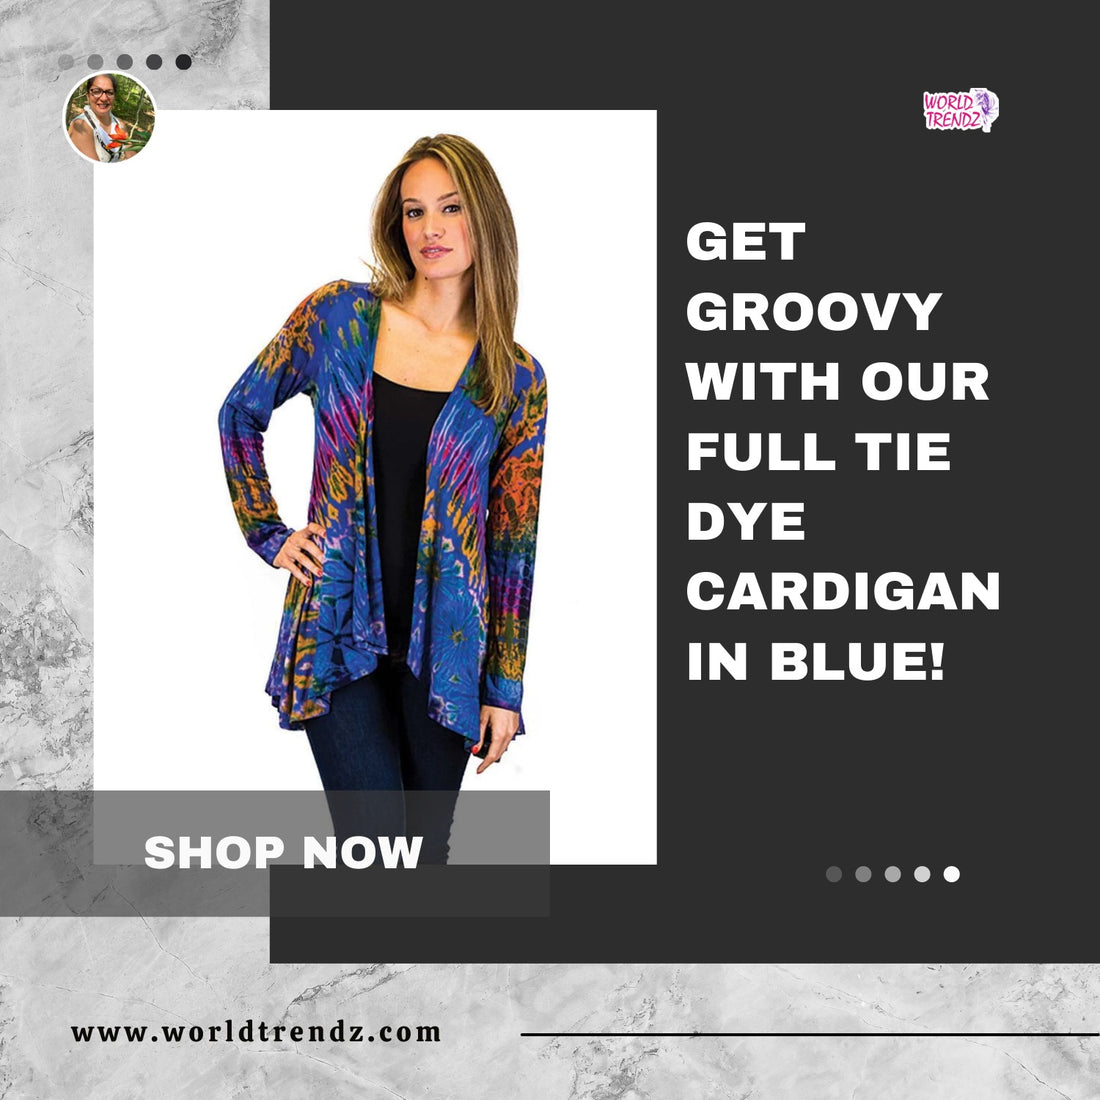 Rock Your Style with our Full Tie Dye Cardigan - A Must-Have for Every Wardrobe!